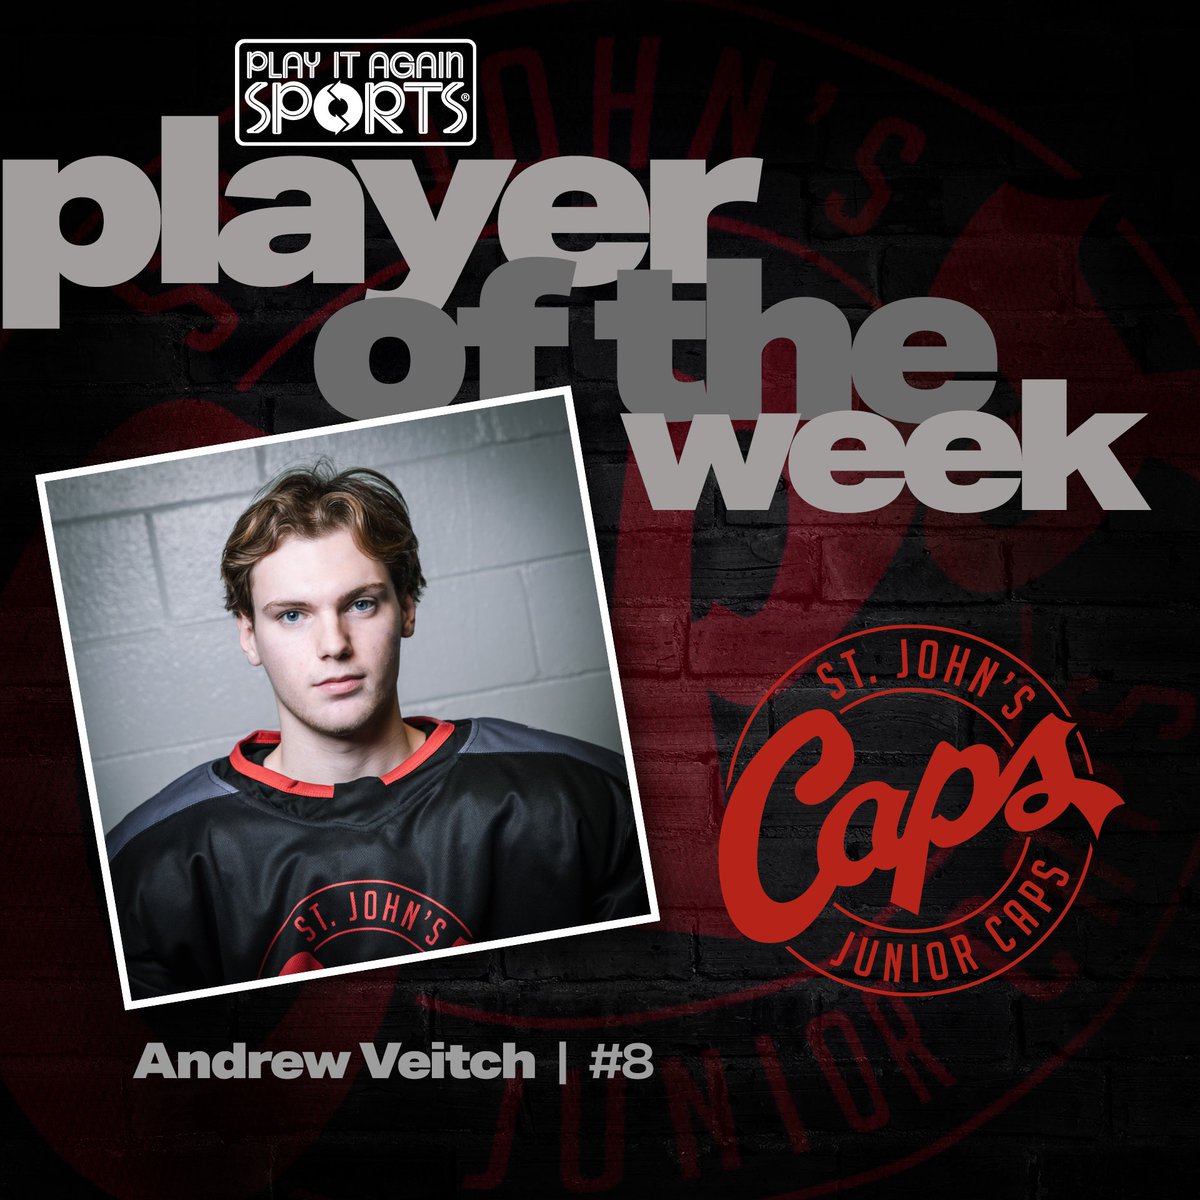 Our first repeat winner!  Andrew Veitch is this week's Play it Again Sports Junior Caps Player of the Week. Andrew's strong play included 5 goals and an assist in 2 games. Congrats, Andrew!  #playeroftheweek